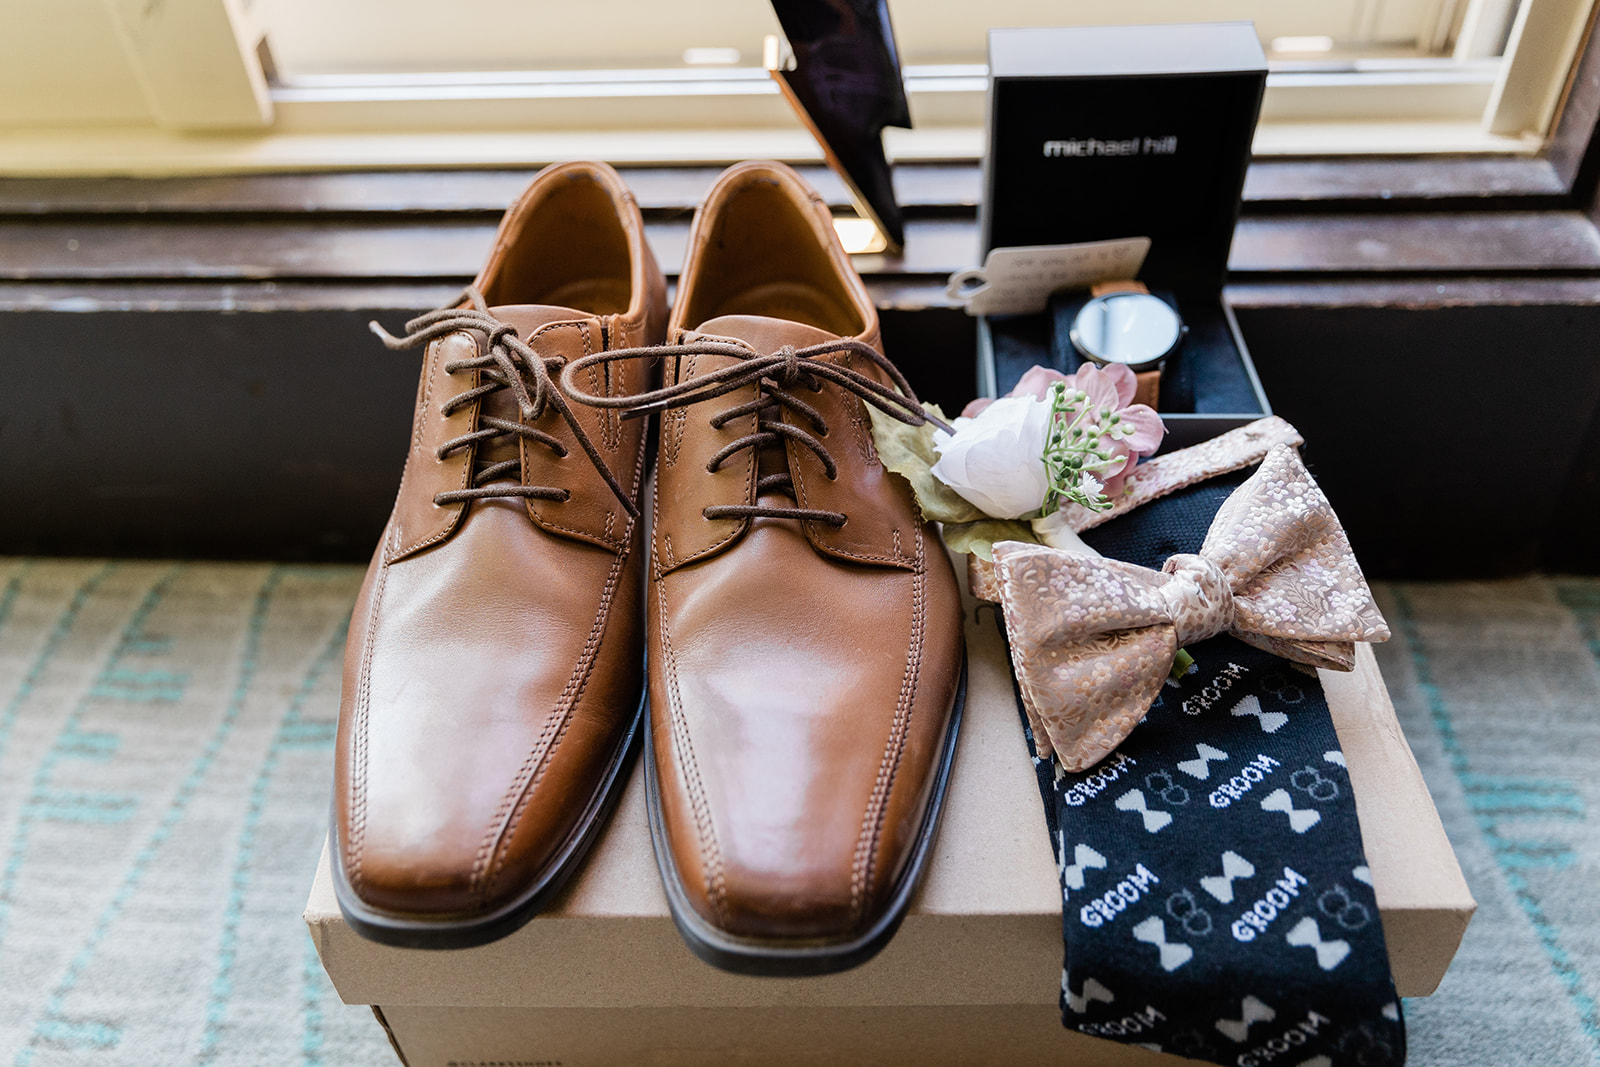 grooms details including shoes, socks, watch and bow tie